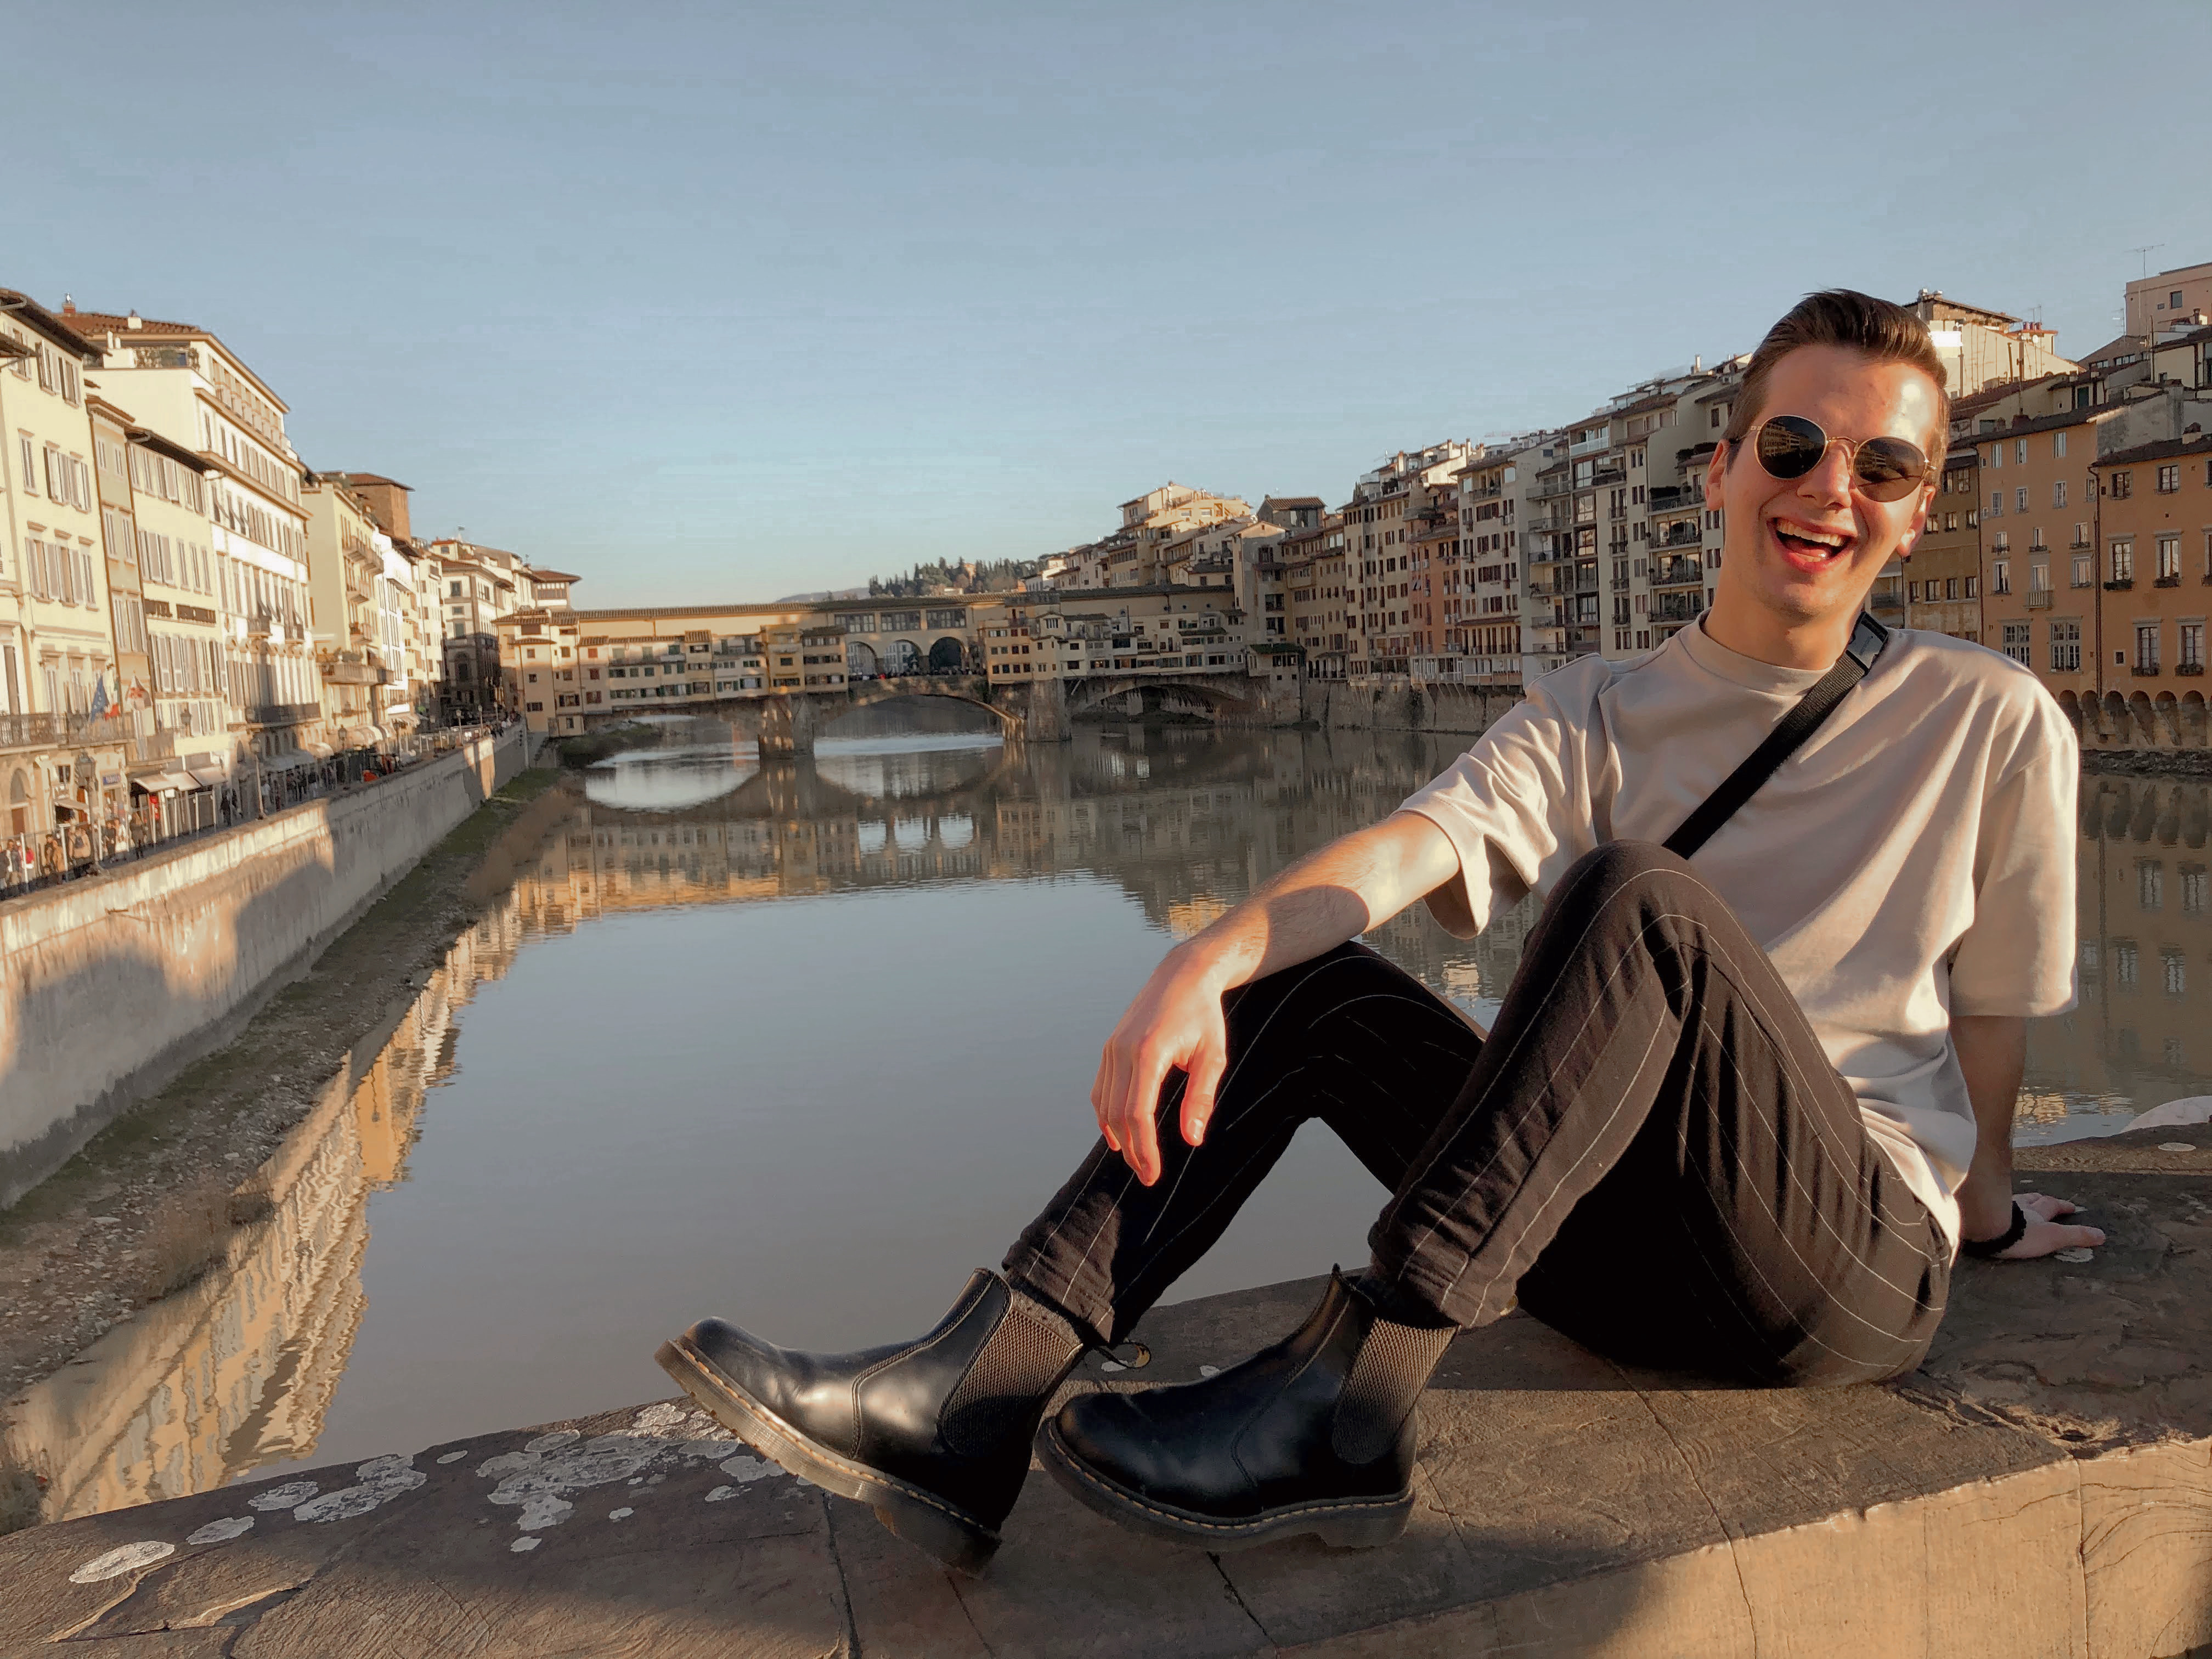 Danny sitting on a bridge overlooking a canal in Italy.